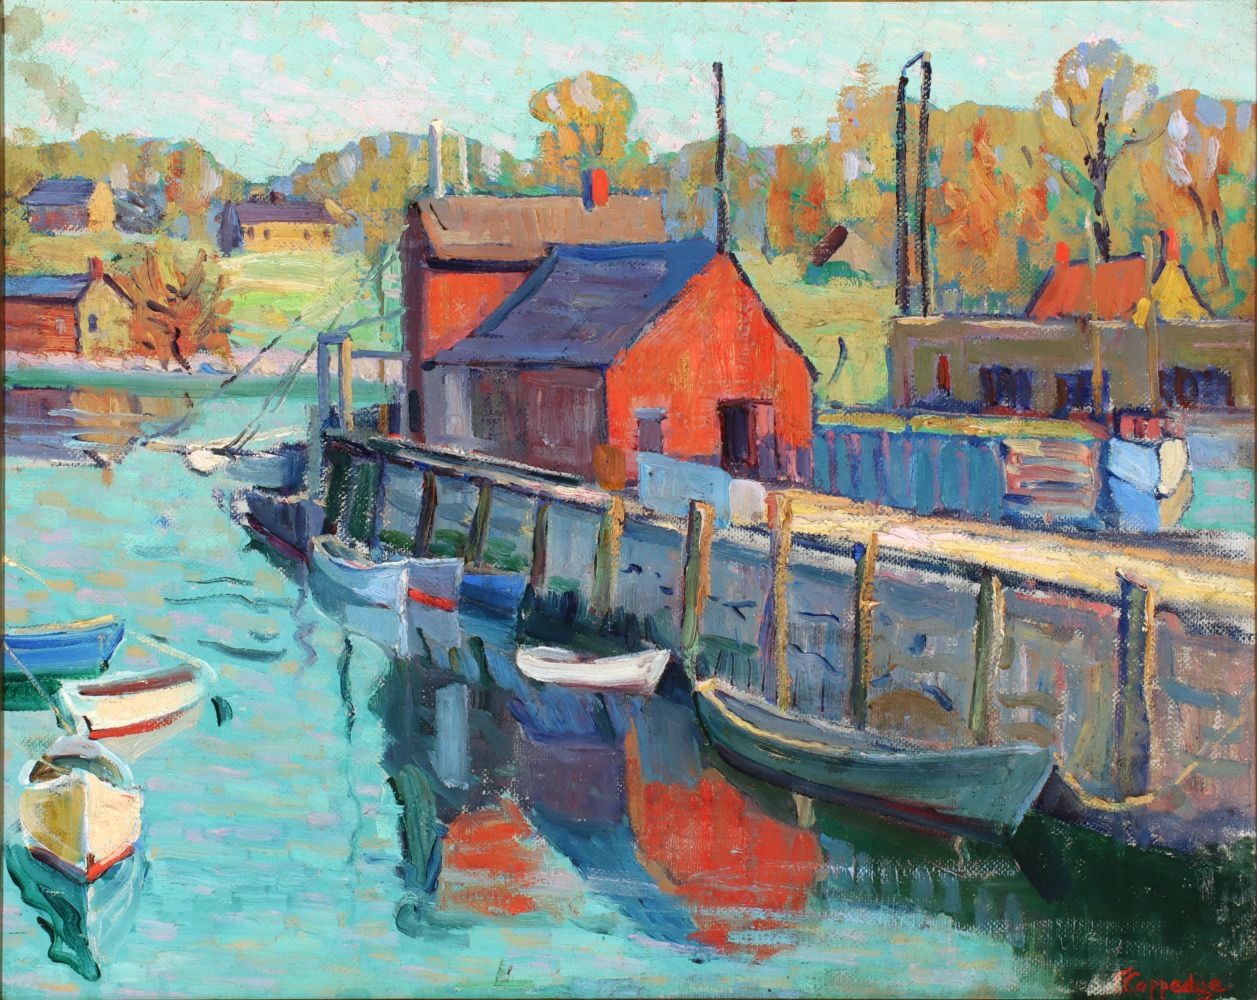 An Untitled View of Motif #1 Rockport Massachusetts (Early 20th century.)